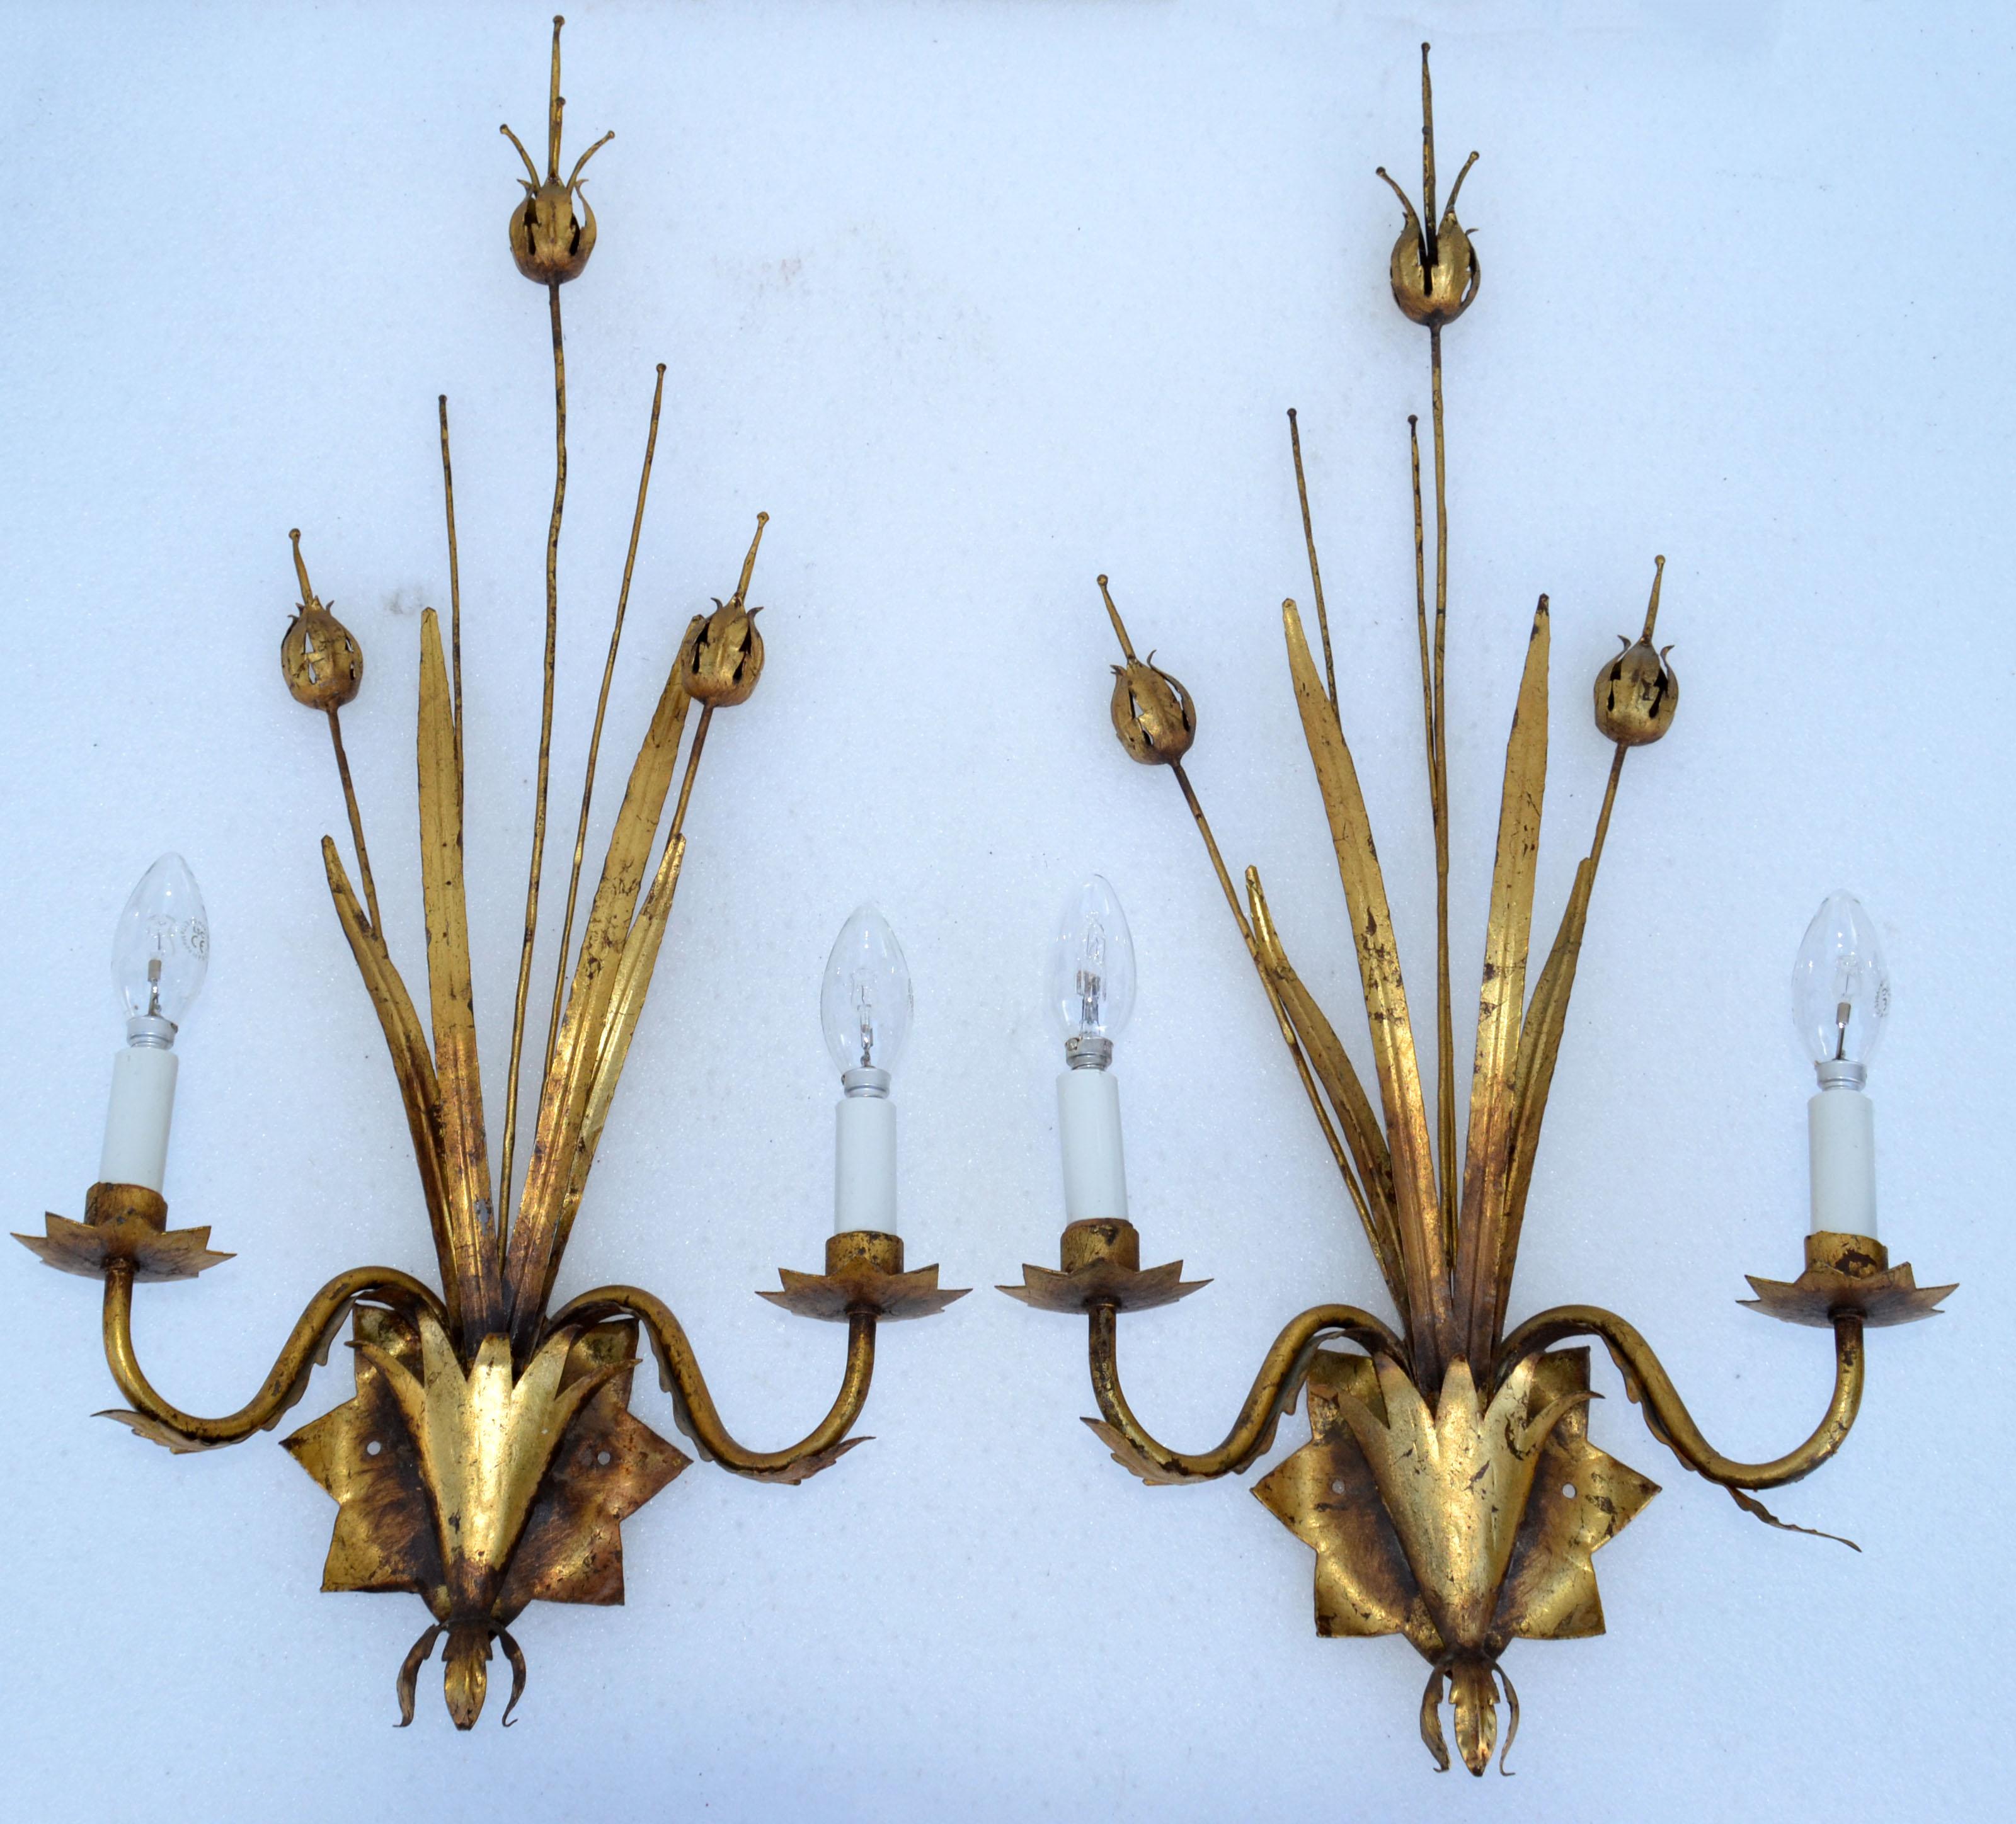 Pair of Large Ferrocolor Sconces Wheat Wall Lights Mid-Century Modern Spain 1960 For Sale 1